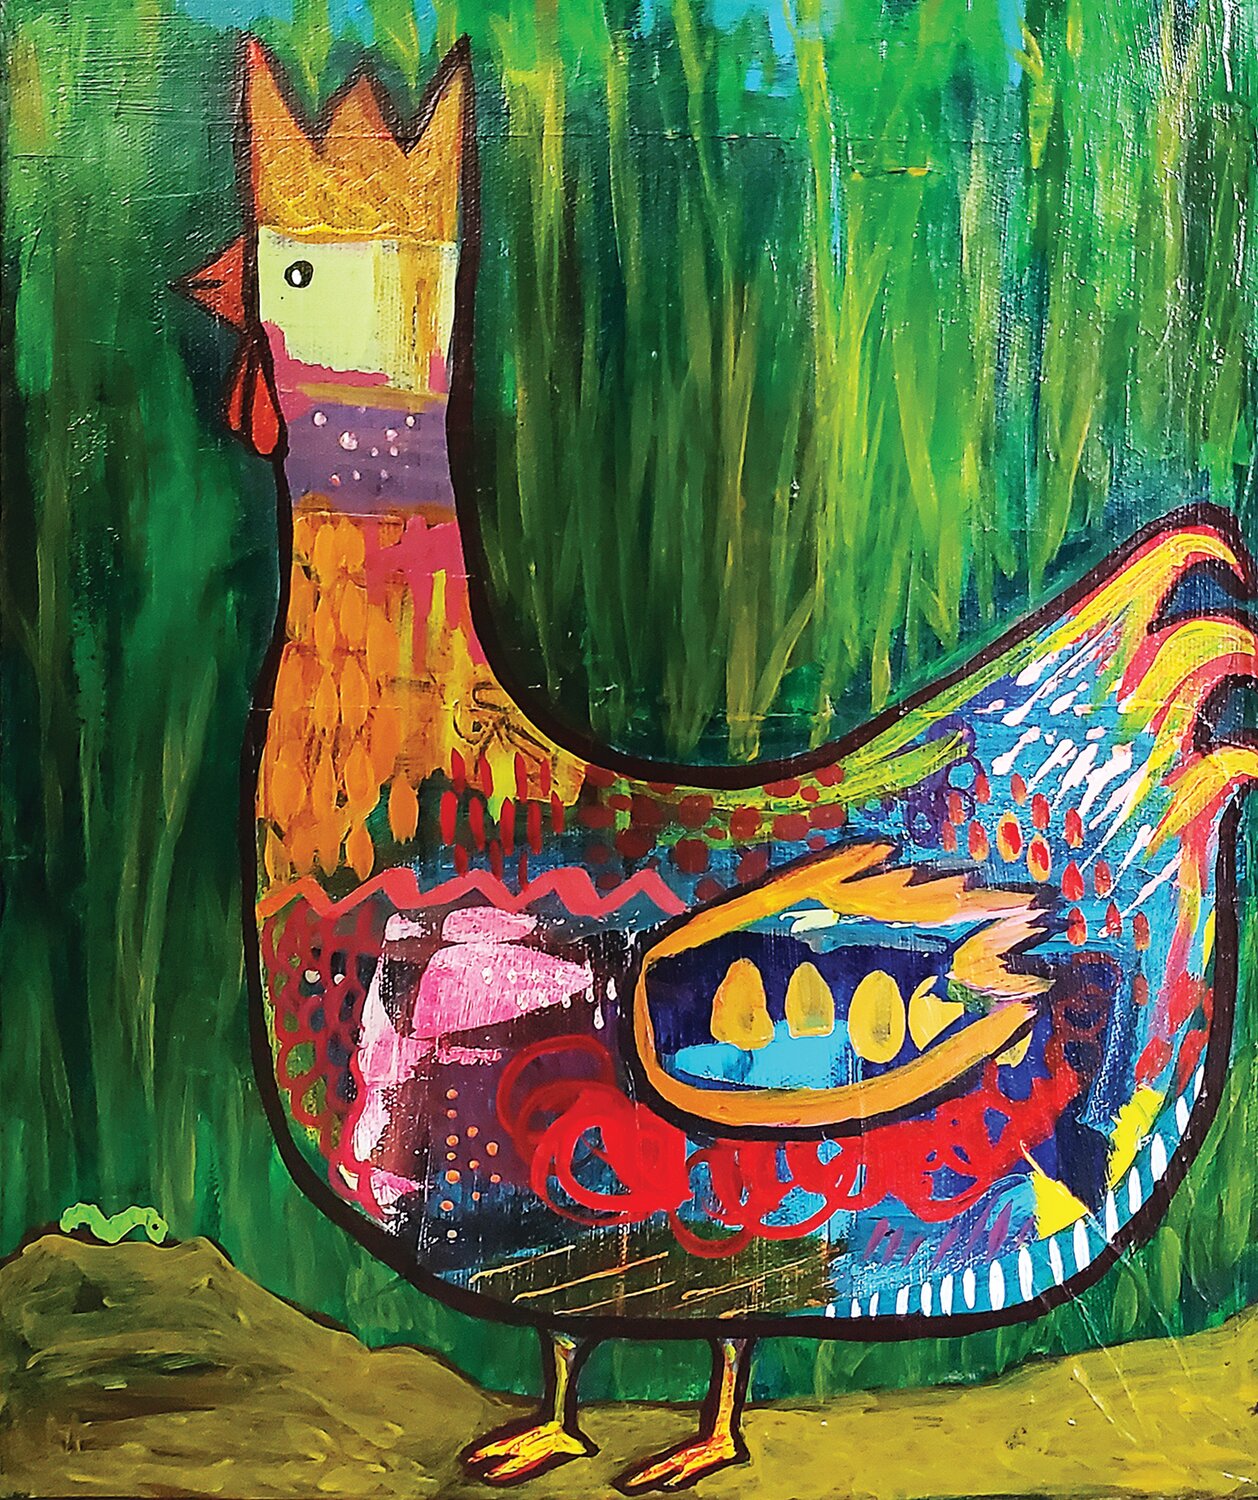 “Rooster” is by Colleen Miller.